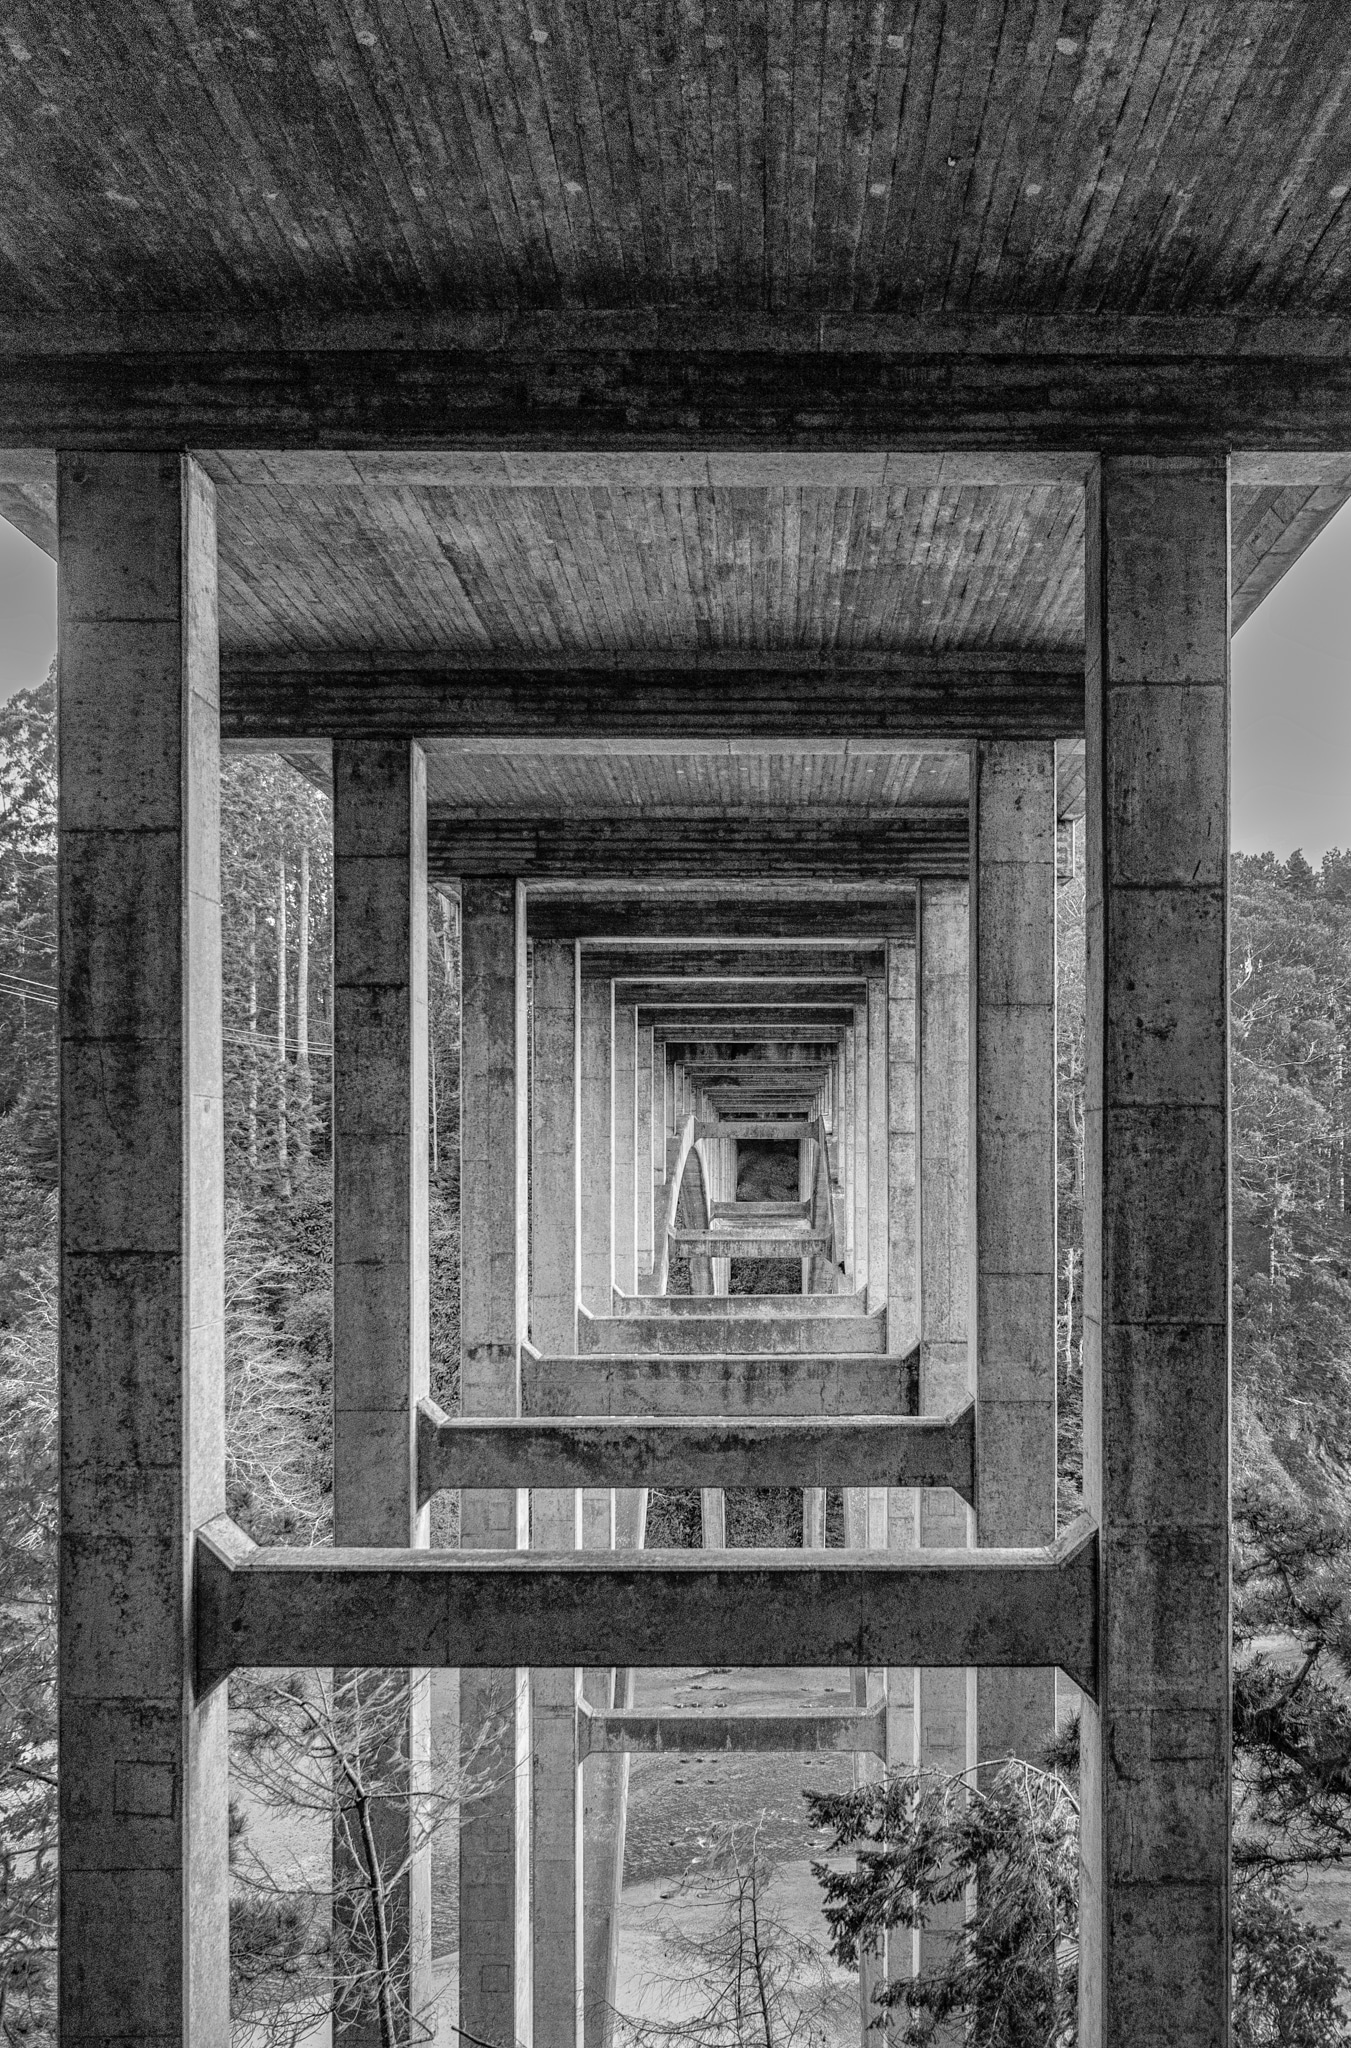 This black-and-white view of retreating squares was taken from beneath the graceful arch of the Russian Gulch Bridge, also known as the Frederick W. Panhorst Bridge, spans the Russian Gulch Creek in Russian Gulch State Park, Mendocino County, California,